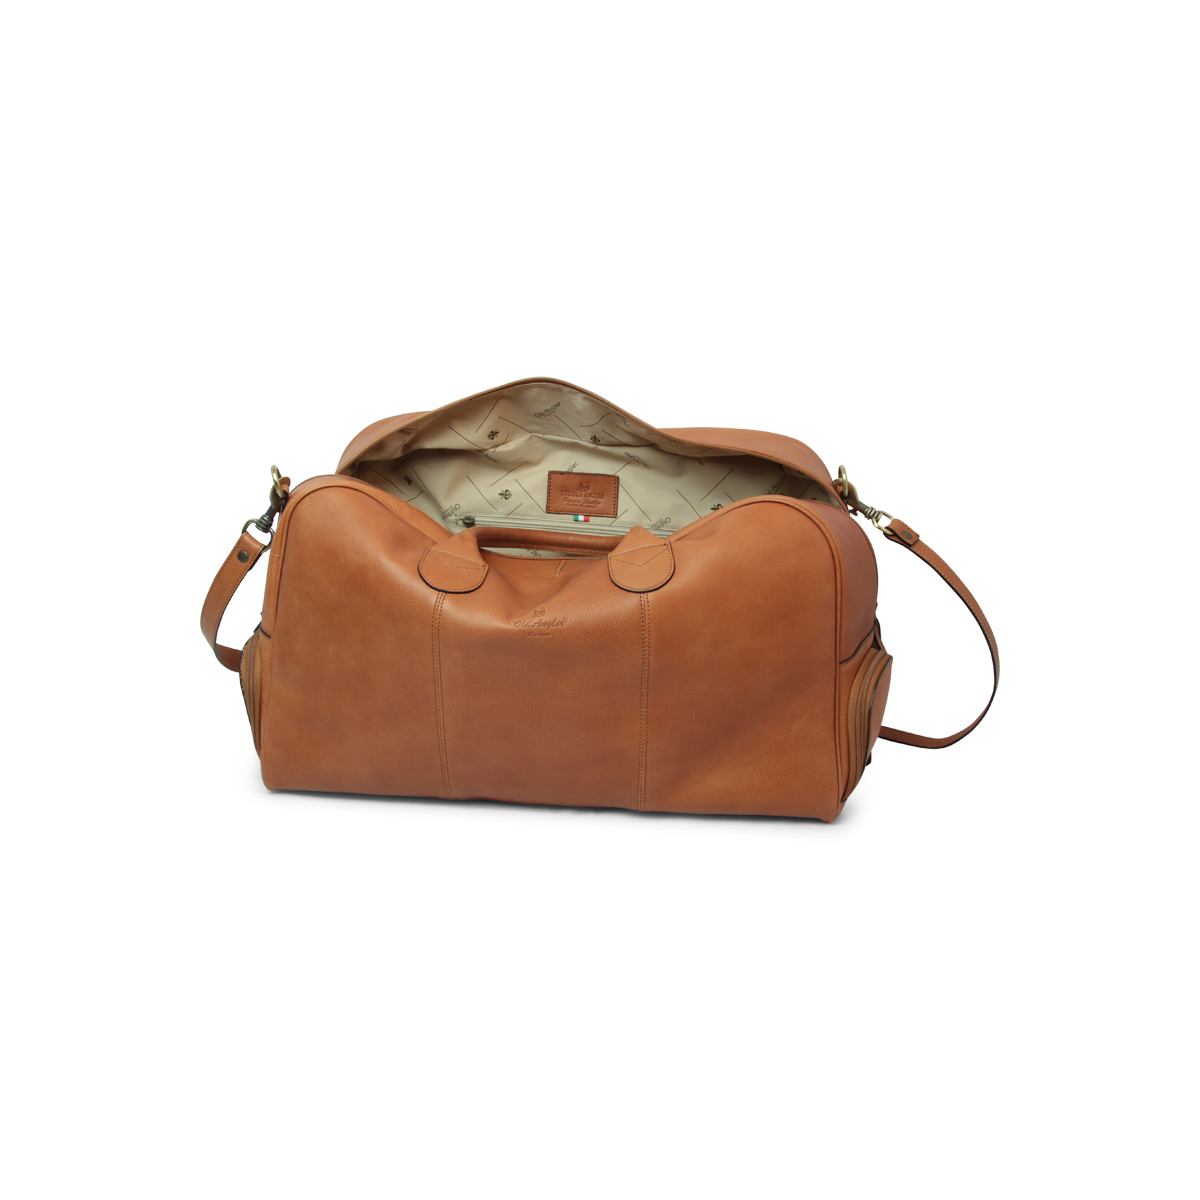 All in one leather bag - gold|403991CO|Old Angler Firenze